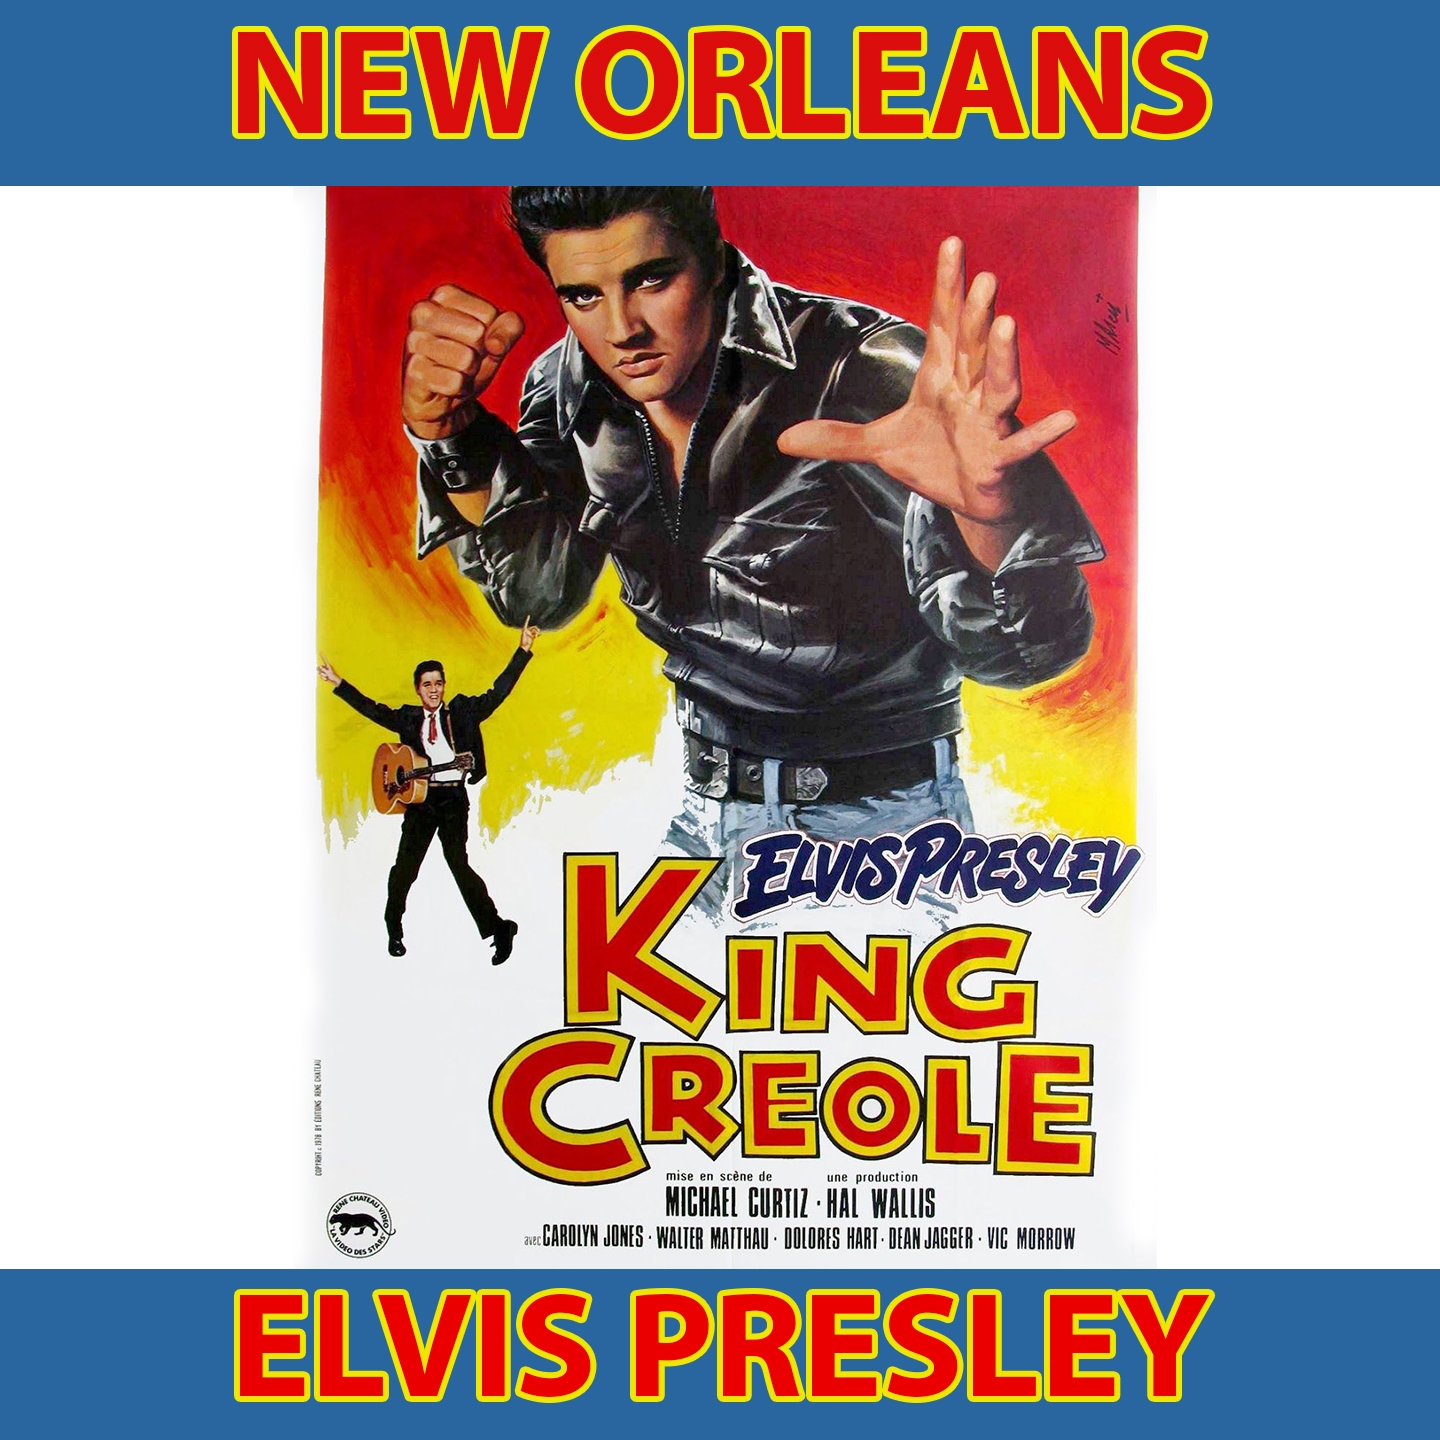 New Orleans (From "King Creole" Original Soundtrack)